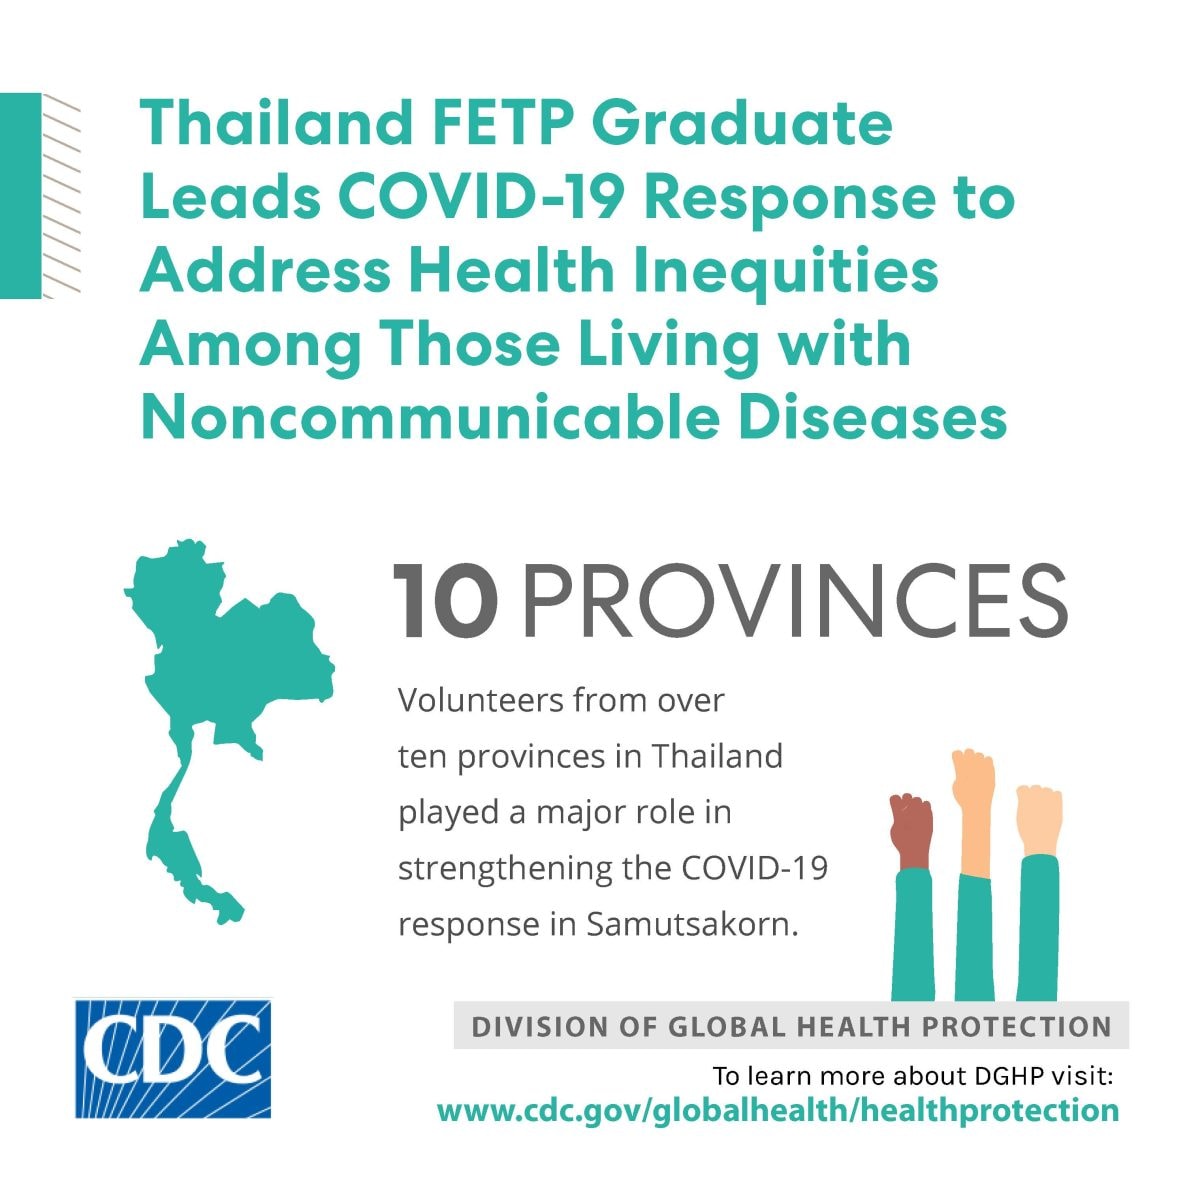 Thailand FETP Graduate Leads COVID-19 Response to Address Health Inequities Among Those Living with Noncommunicable Diseases